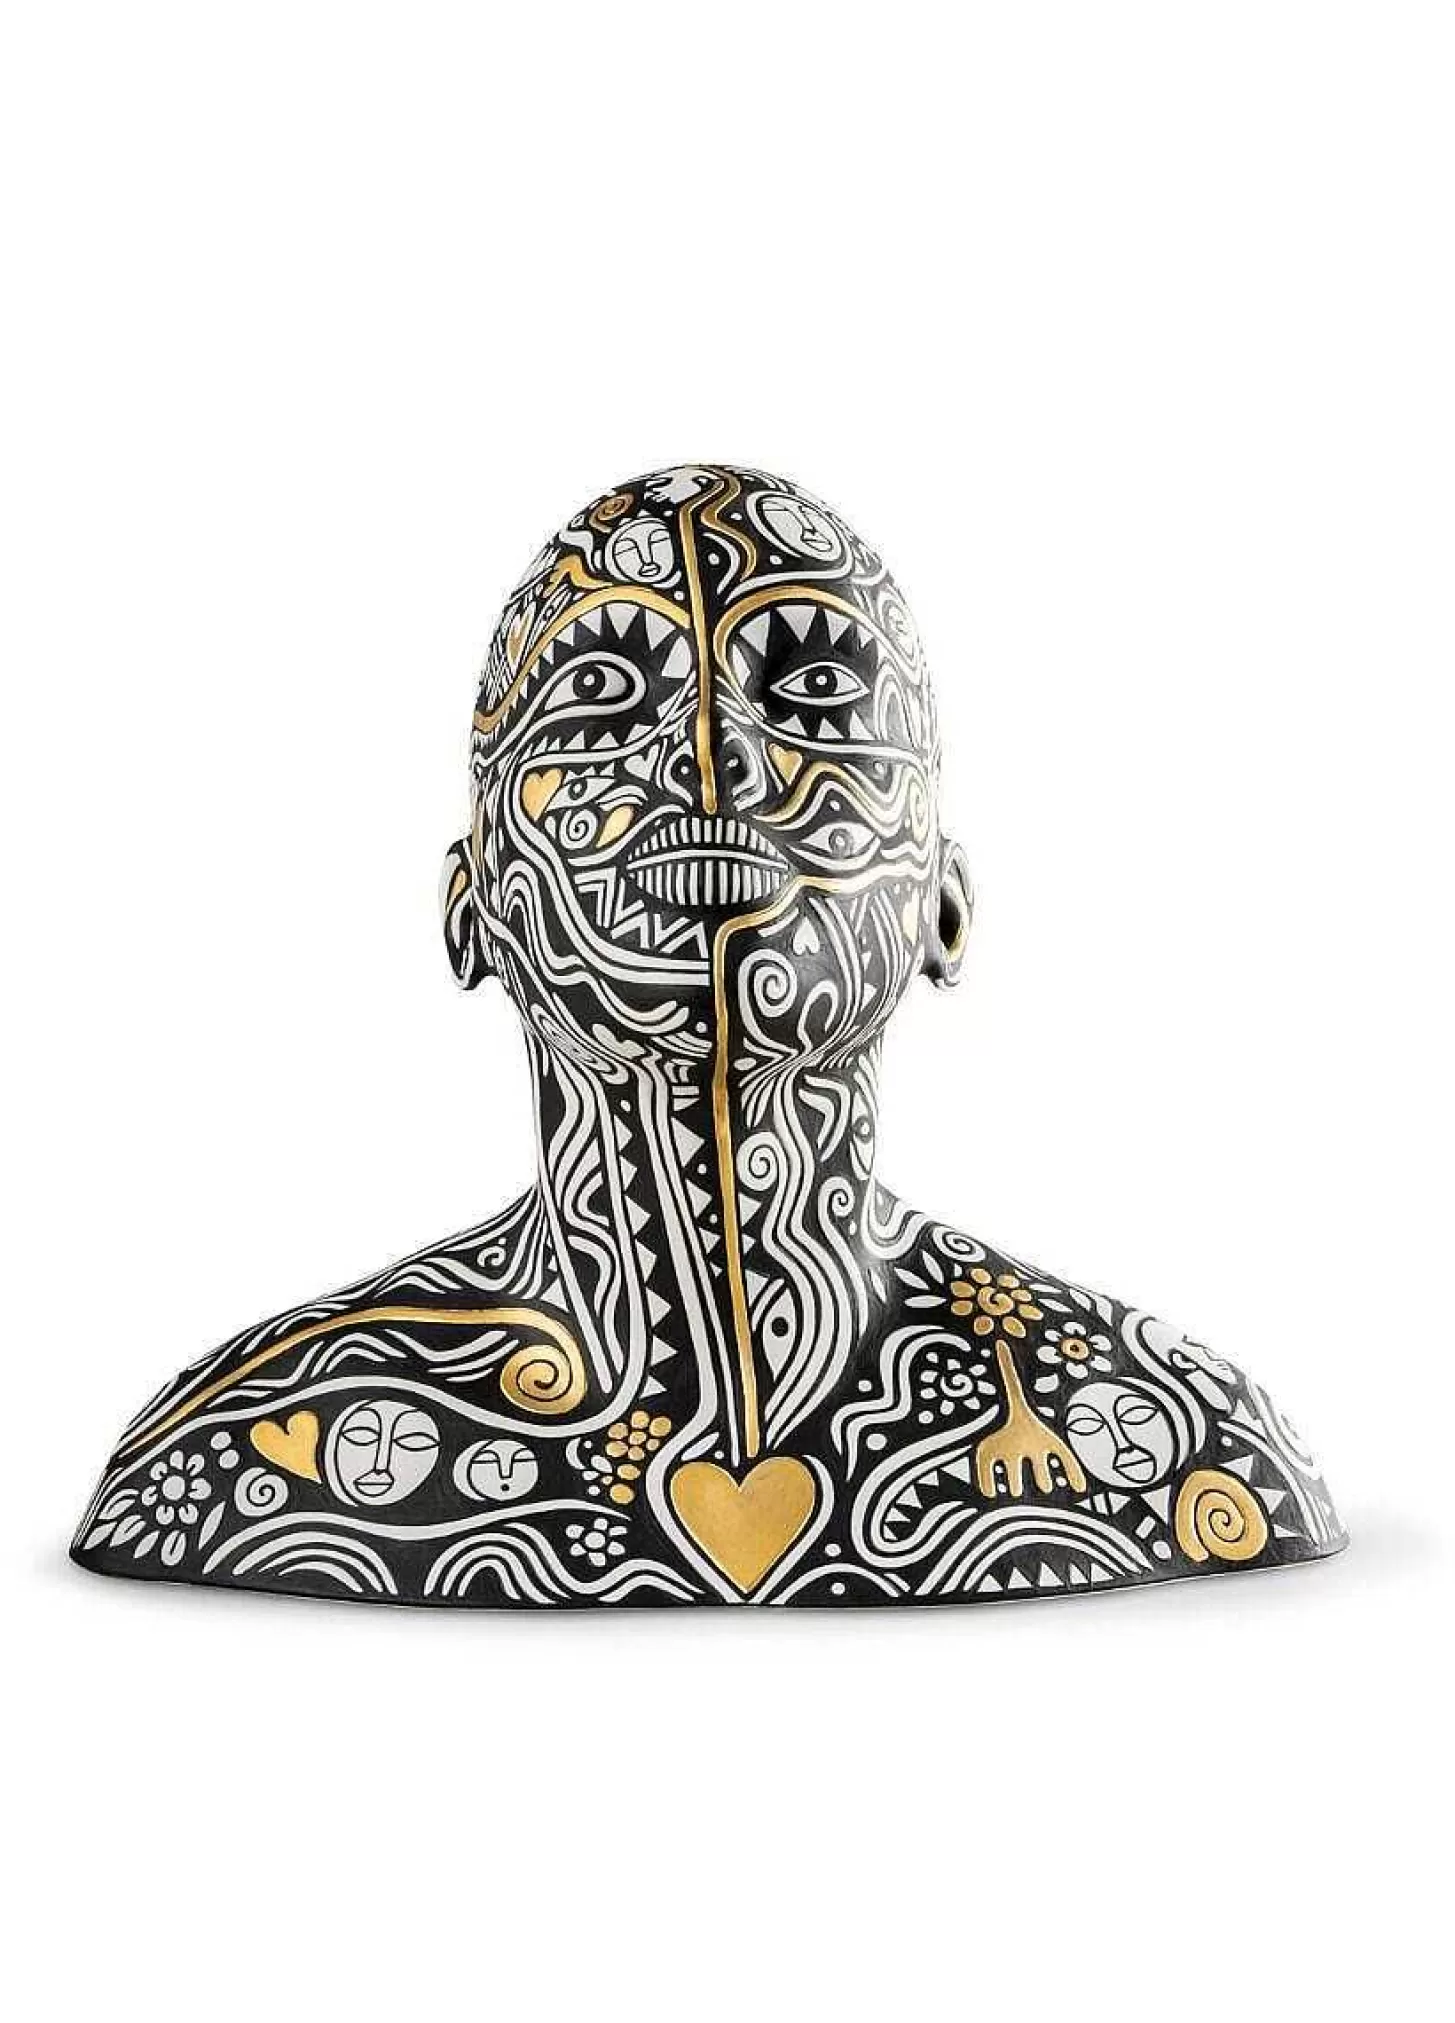 Lladró The Dreamer By Laolu - Bust Sculpture. Limited Edition^ Design